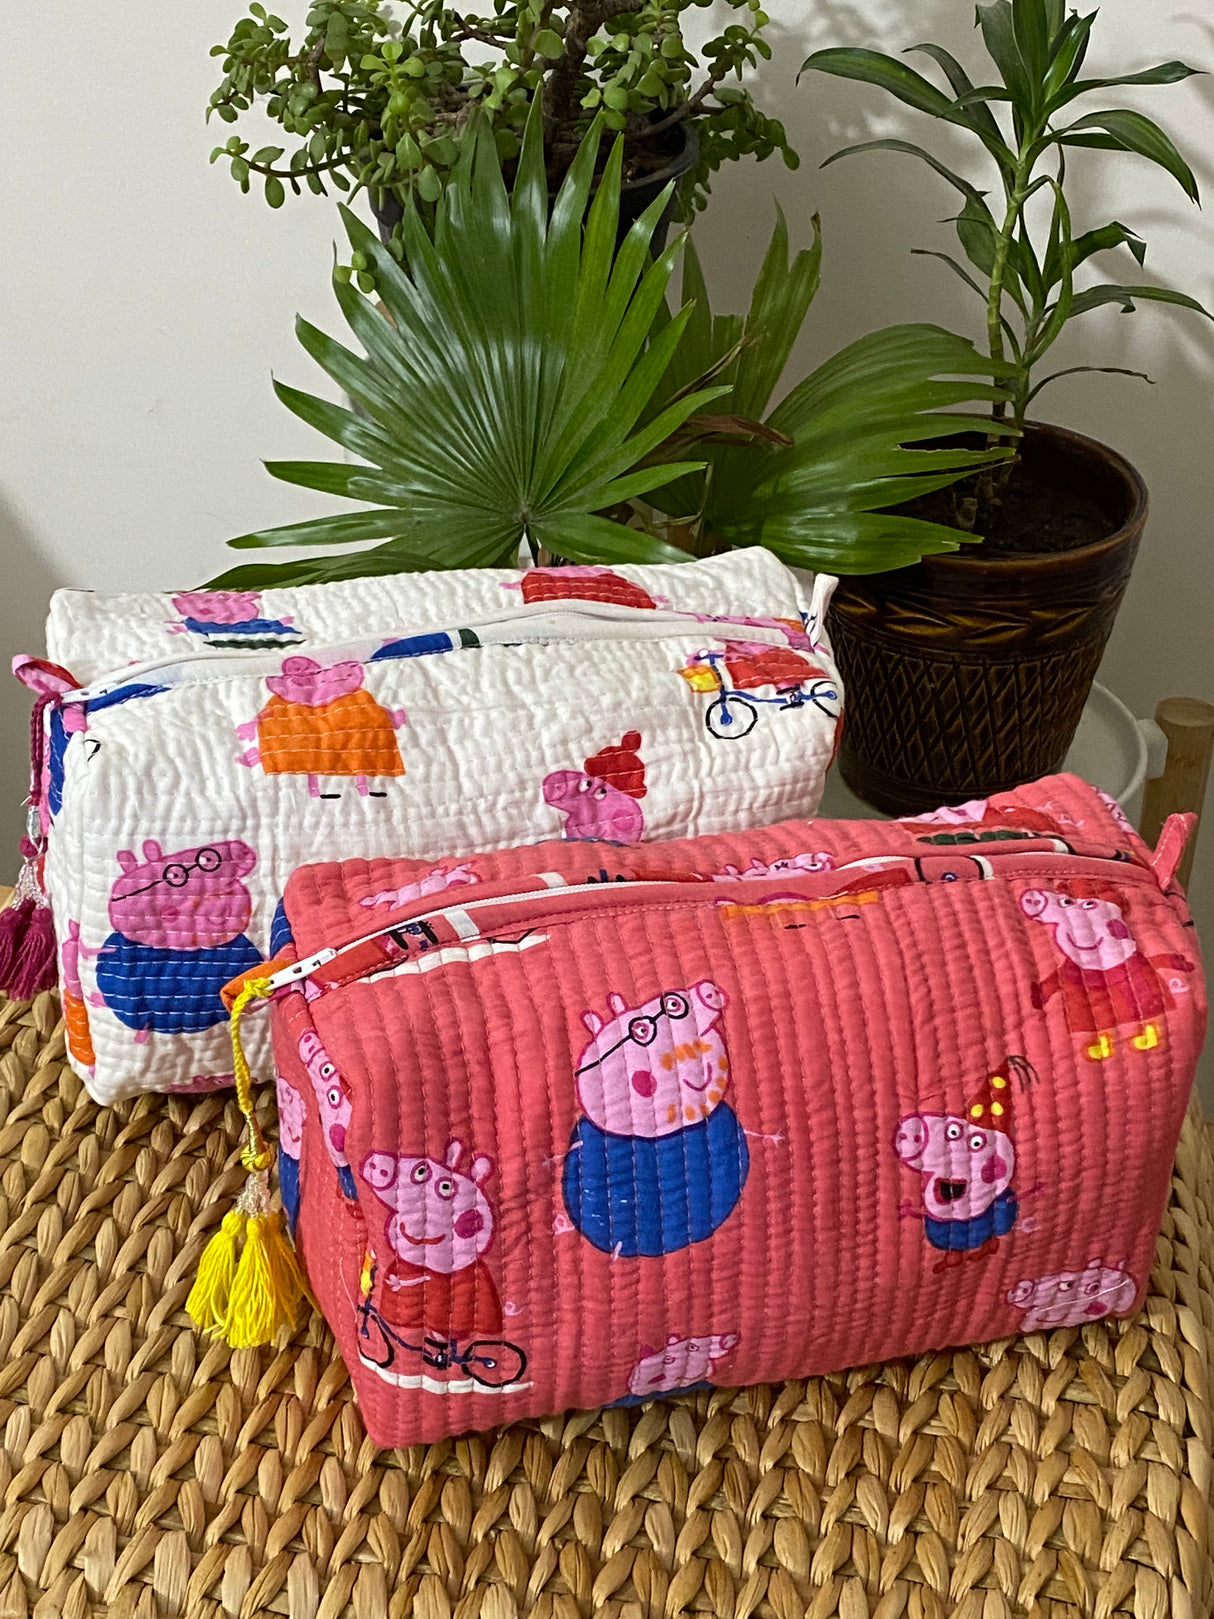 Pair of 2 LARGE Multipurpose Pouches/ Bags